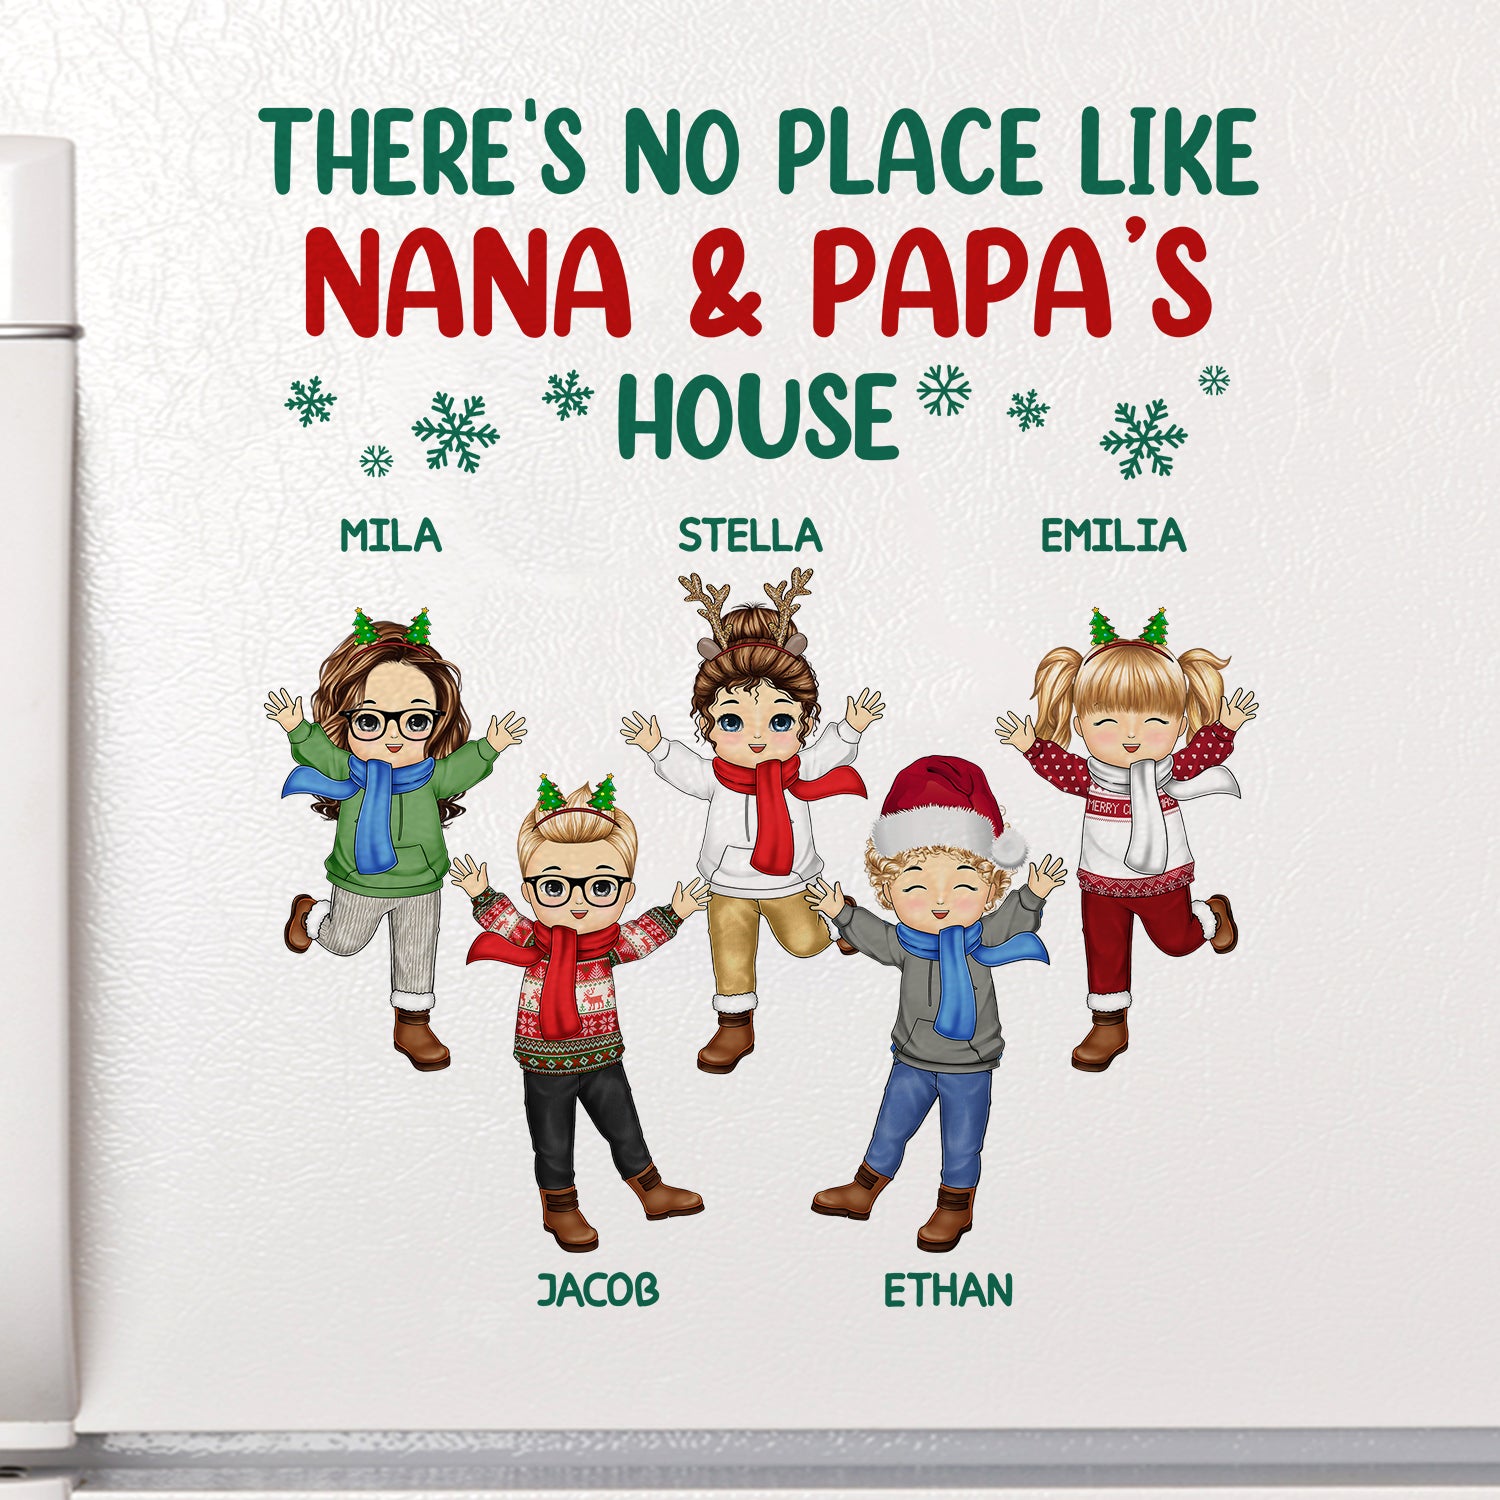 There Is No Place Like Nana & Papa's House - Christmas Gift For Grandparents, Parents - Personalized Decor Decal